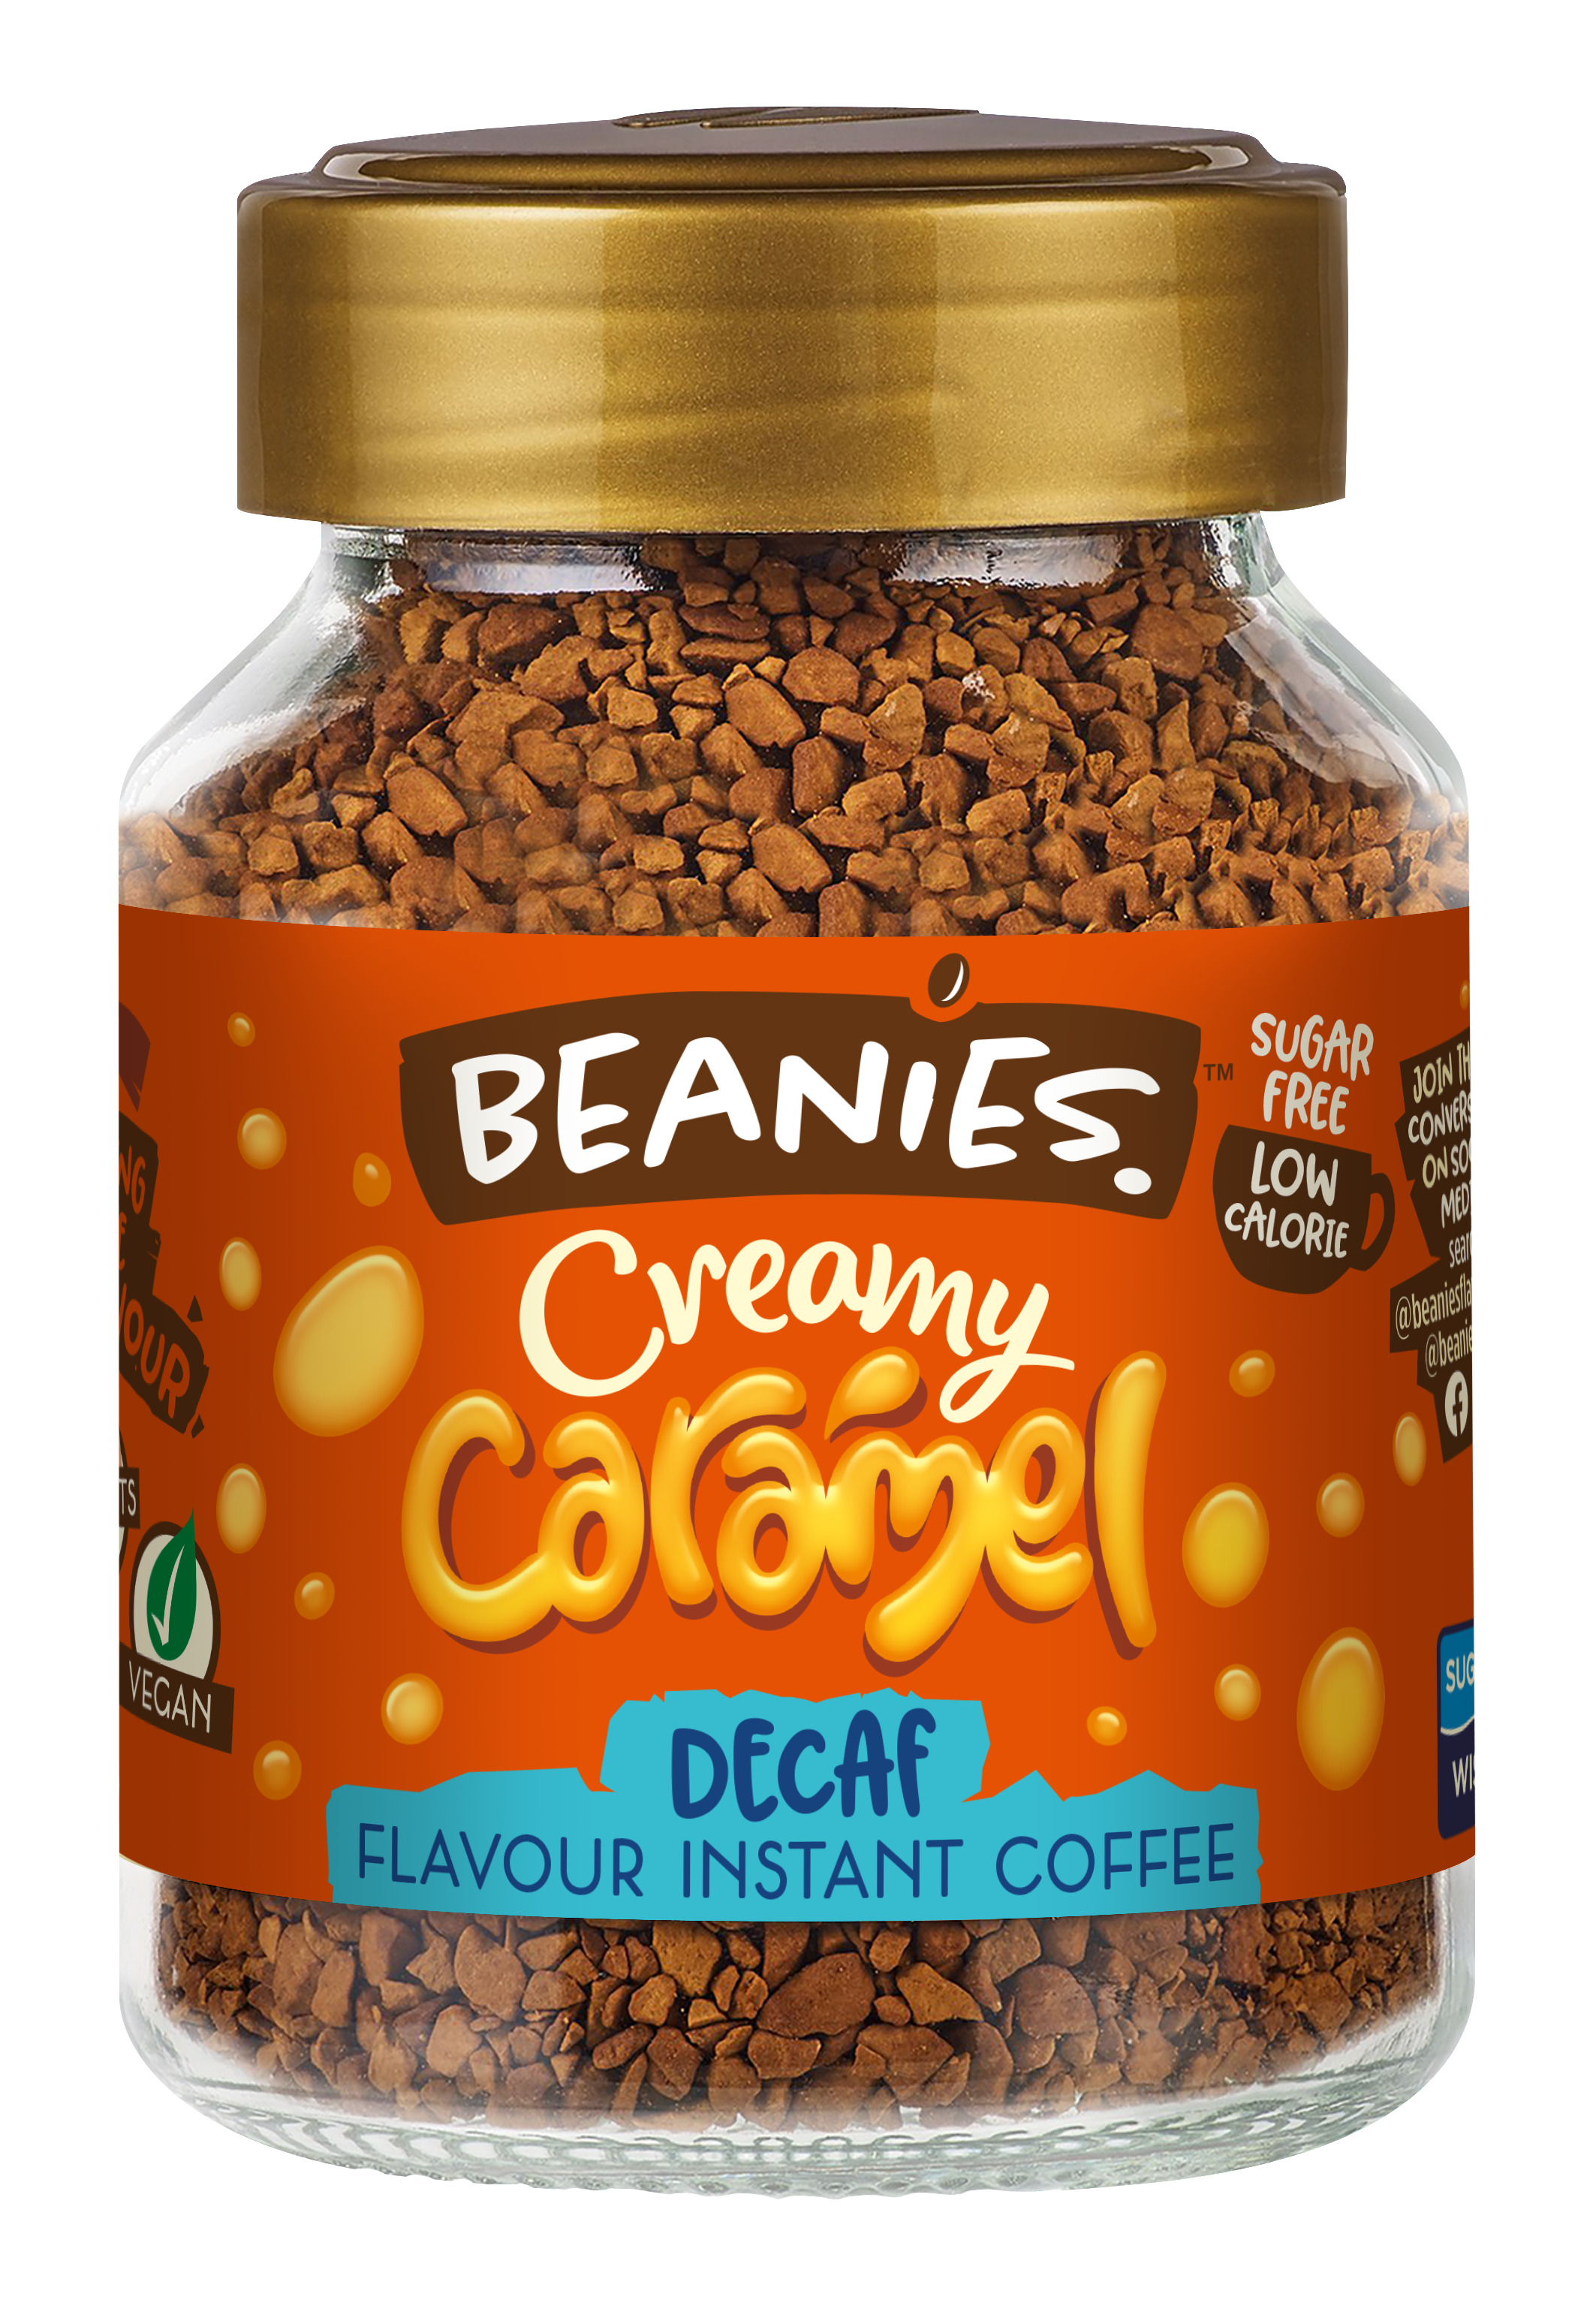 Beanies Decaf 50g Creamy Caramel Instant Flavoured Coffee